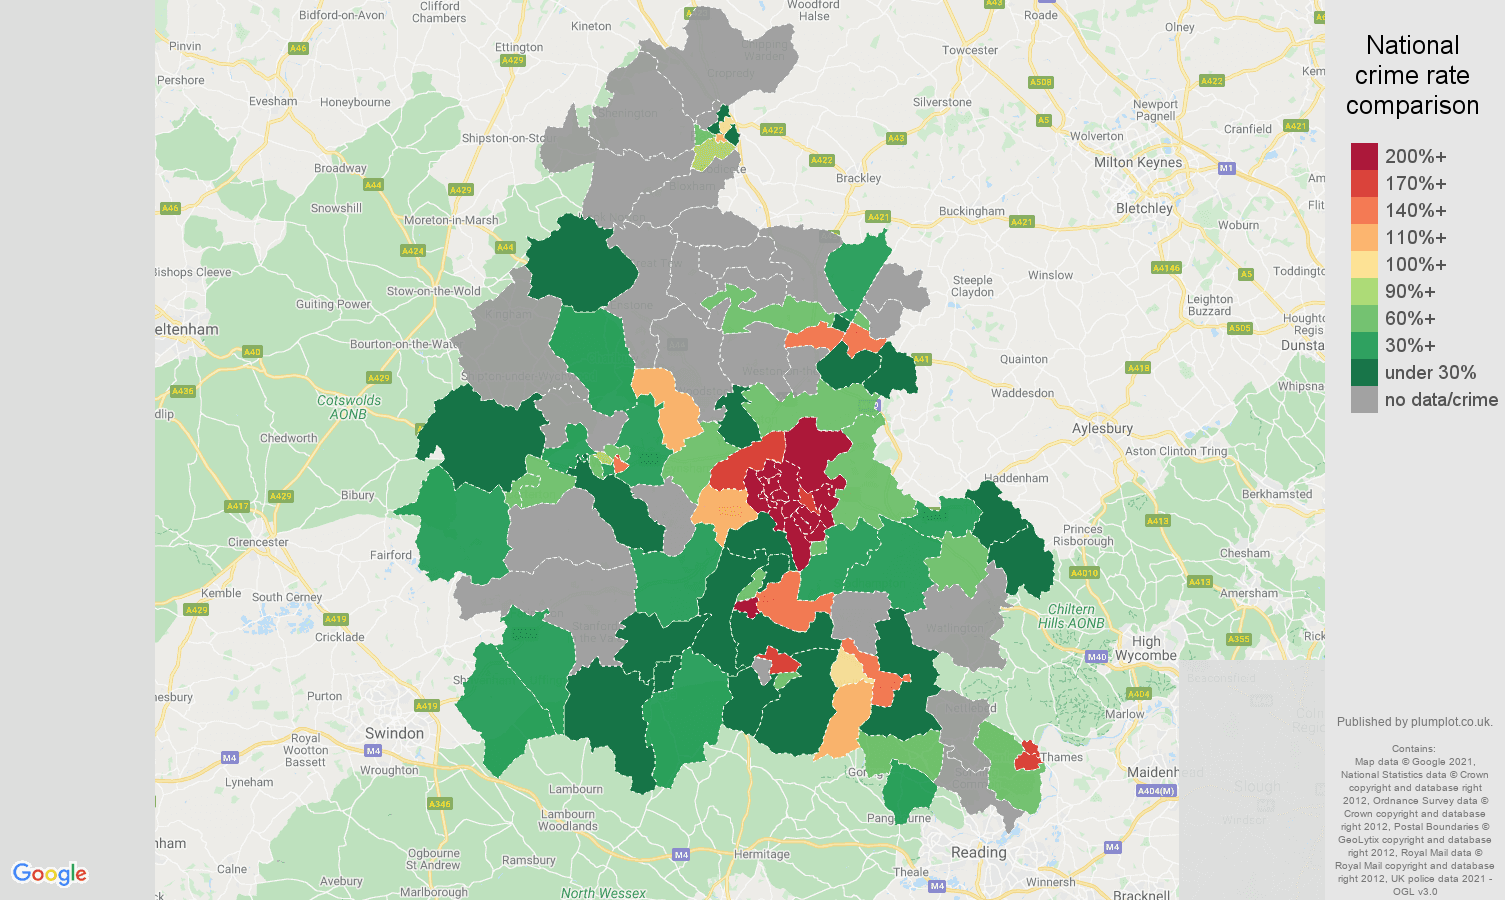 Oxfordshire bicycle theft crime rate comparison map